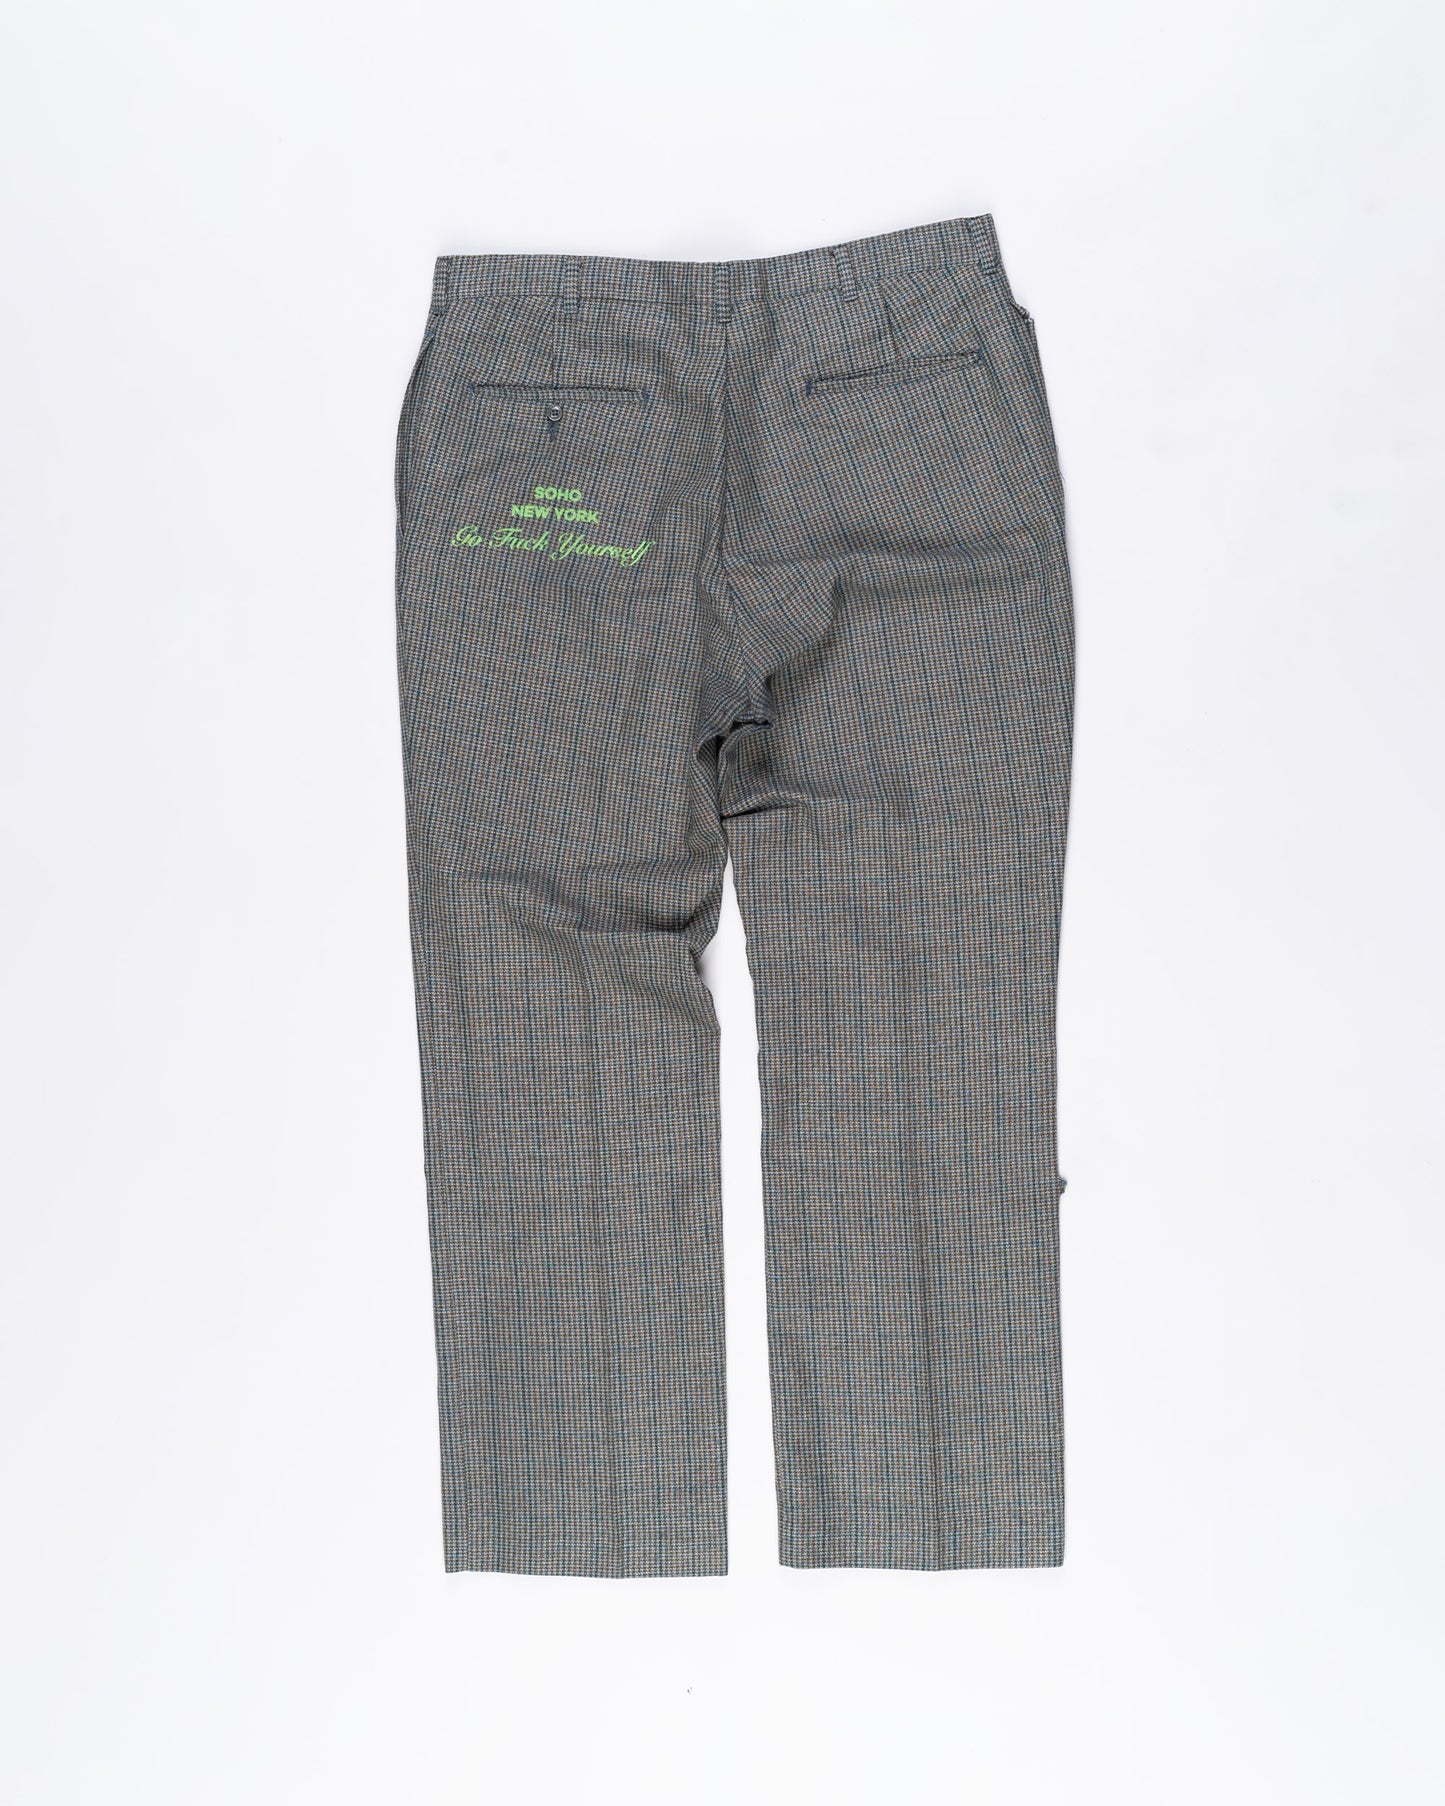 Levis Wool Houndstooth Trouser Size: 32